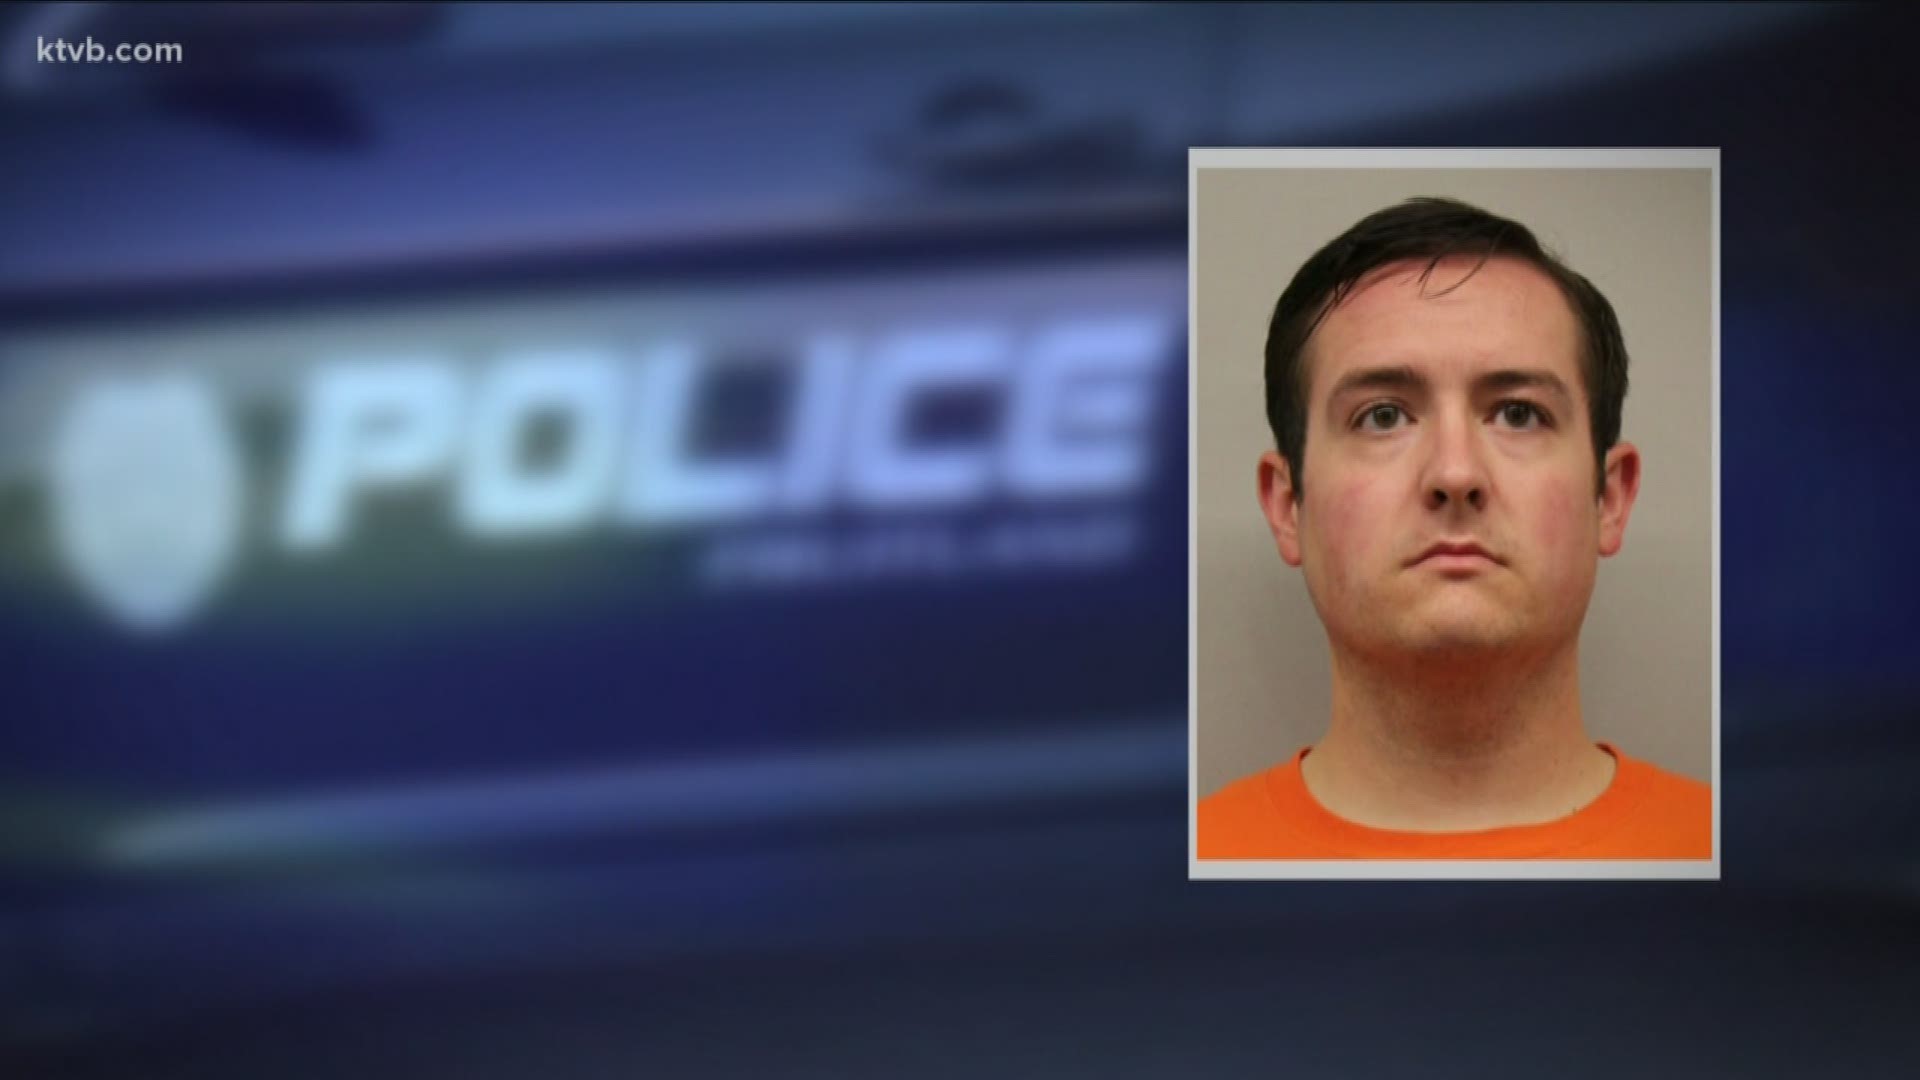 Alexander Scott Plaza, a former reserve officer with the Fruitland Police Department, is accused of having inappropriate contact with underage boys.